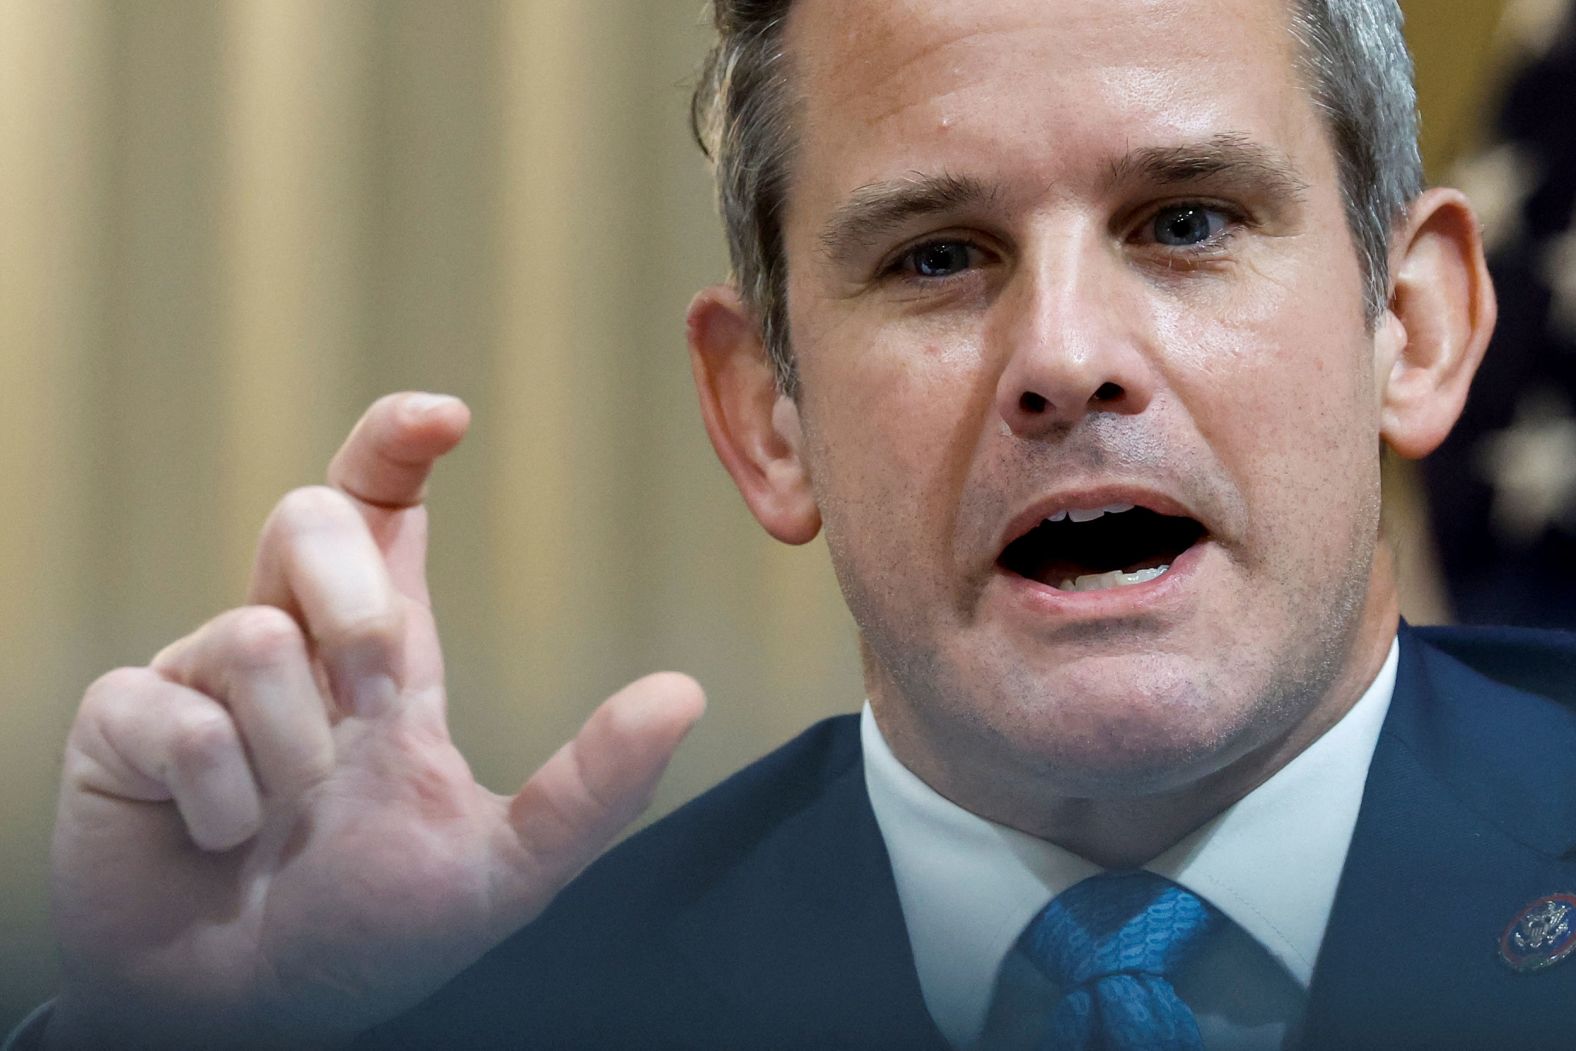 Kinzinger speaks during the hearing on July 21. "Almost everybody wanted President Trump to instruct the mob to disperse," <a href="index.php?page=&url=https%3A%2F%2Fwww.cnn.com%2Fpolitics%2Flive-news%2Fjanuary-6-hearings-july-21%2Fh_a543c7c9f8faec3713882ede79ccfc79" target="_blank">he said.</a> "President Trump refused."